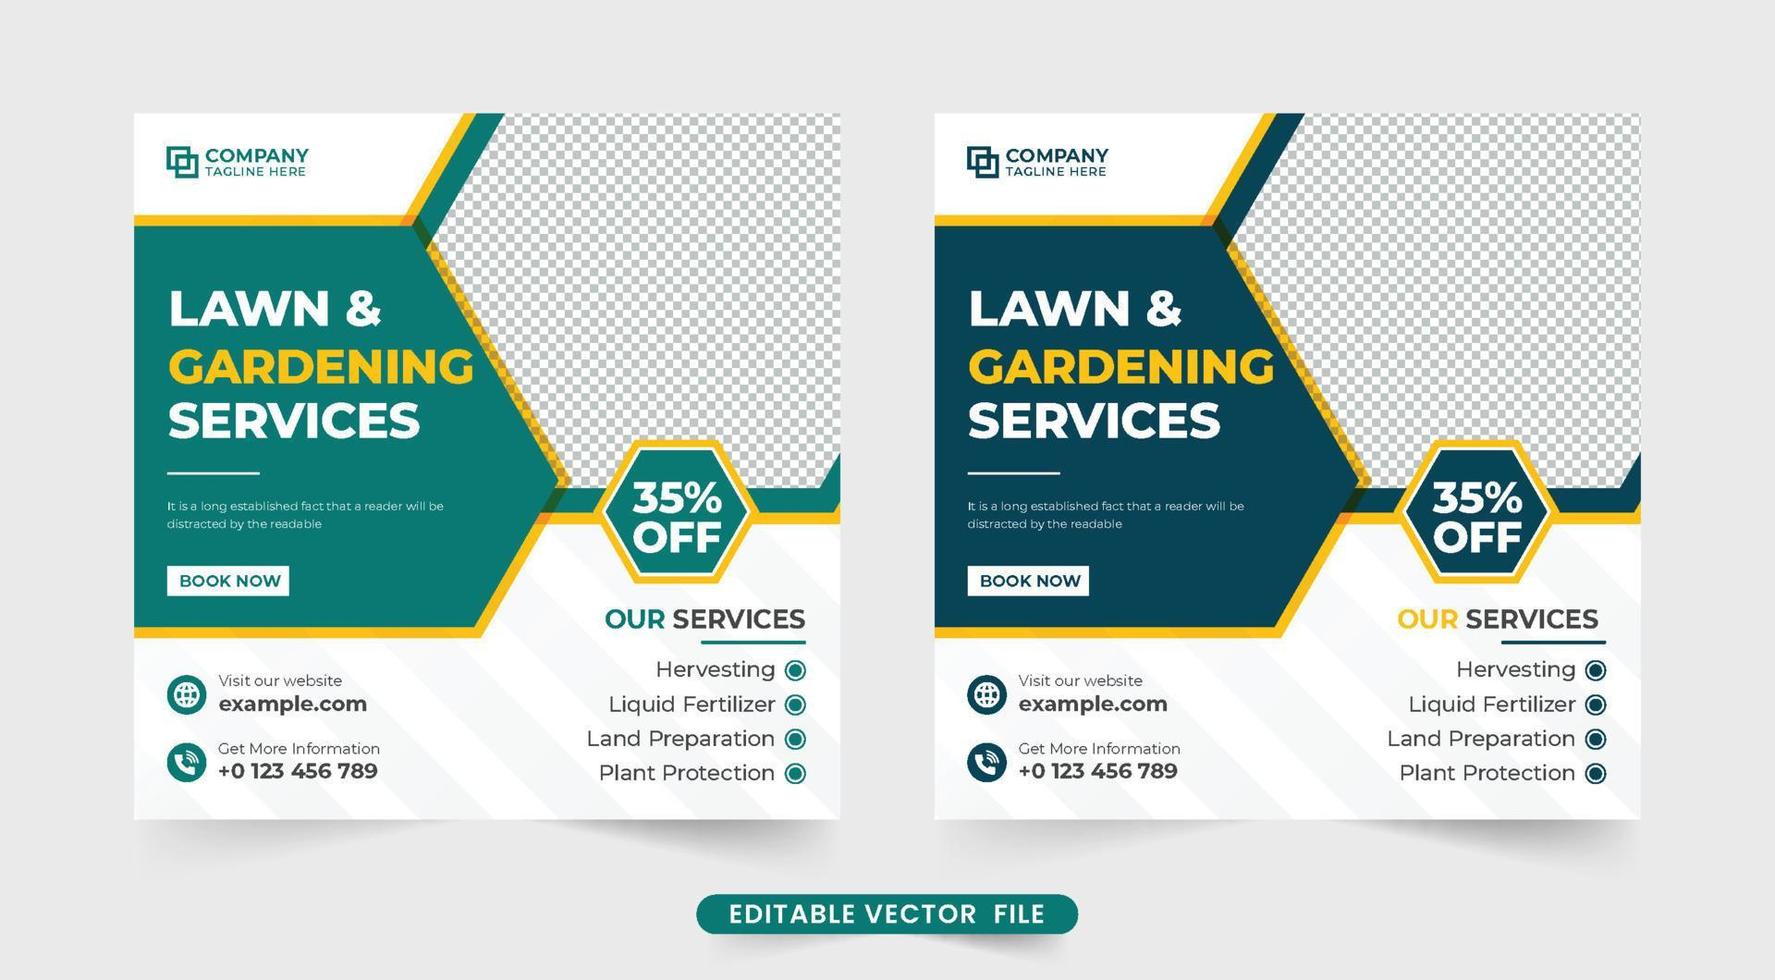 Farming and landscaping service web banner with discount offer section. Agro farm industry social media post design with blue and green colors. Gardening service advertisement template. vector